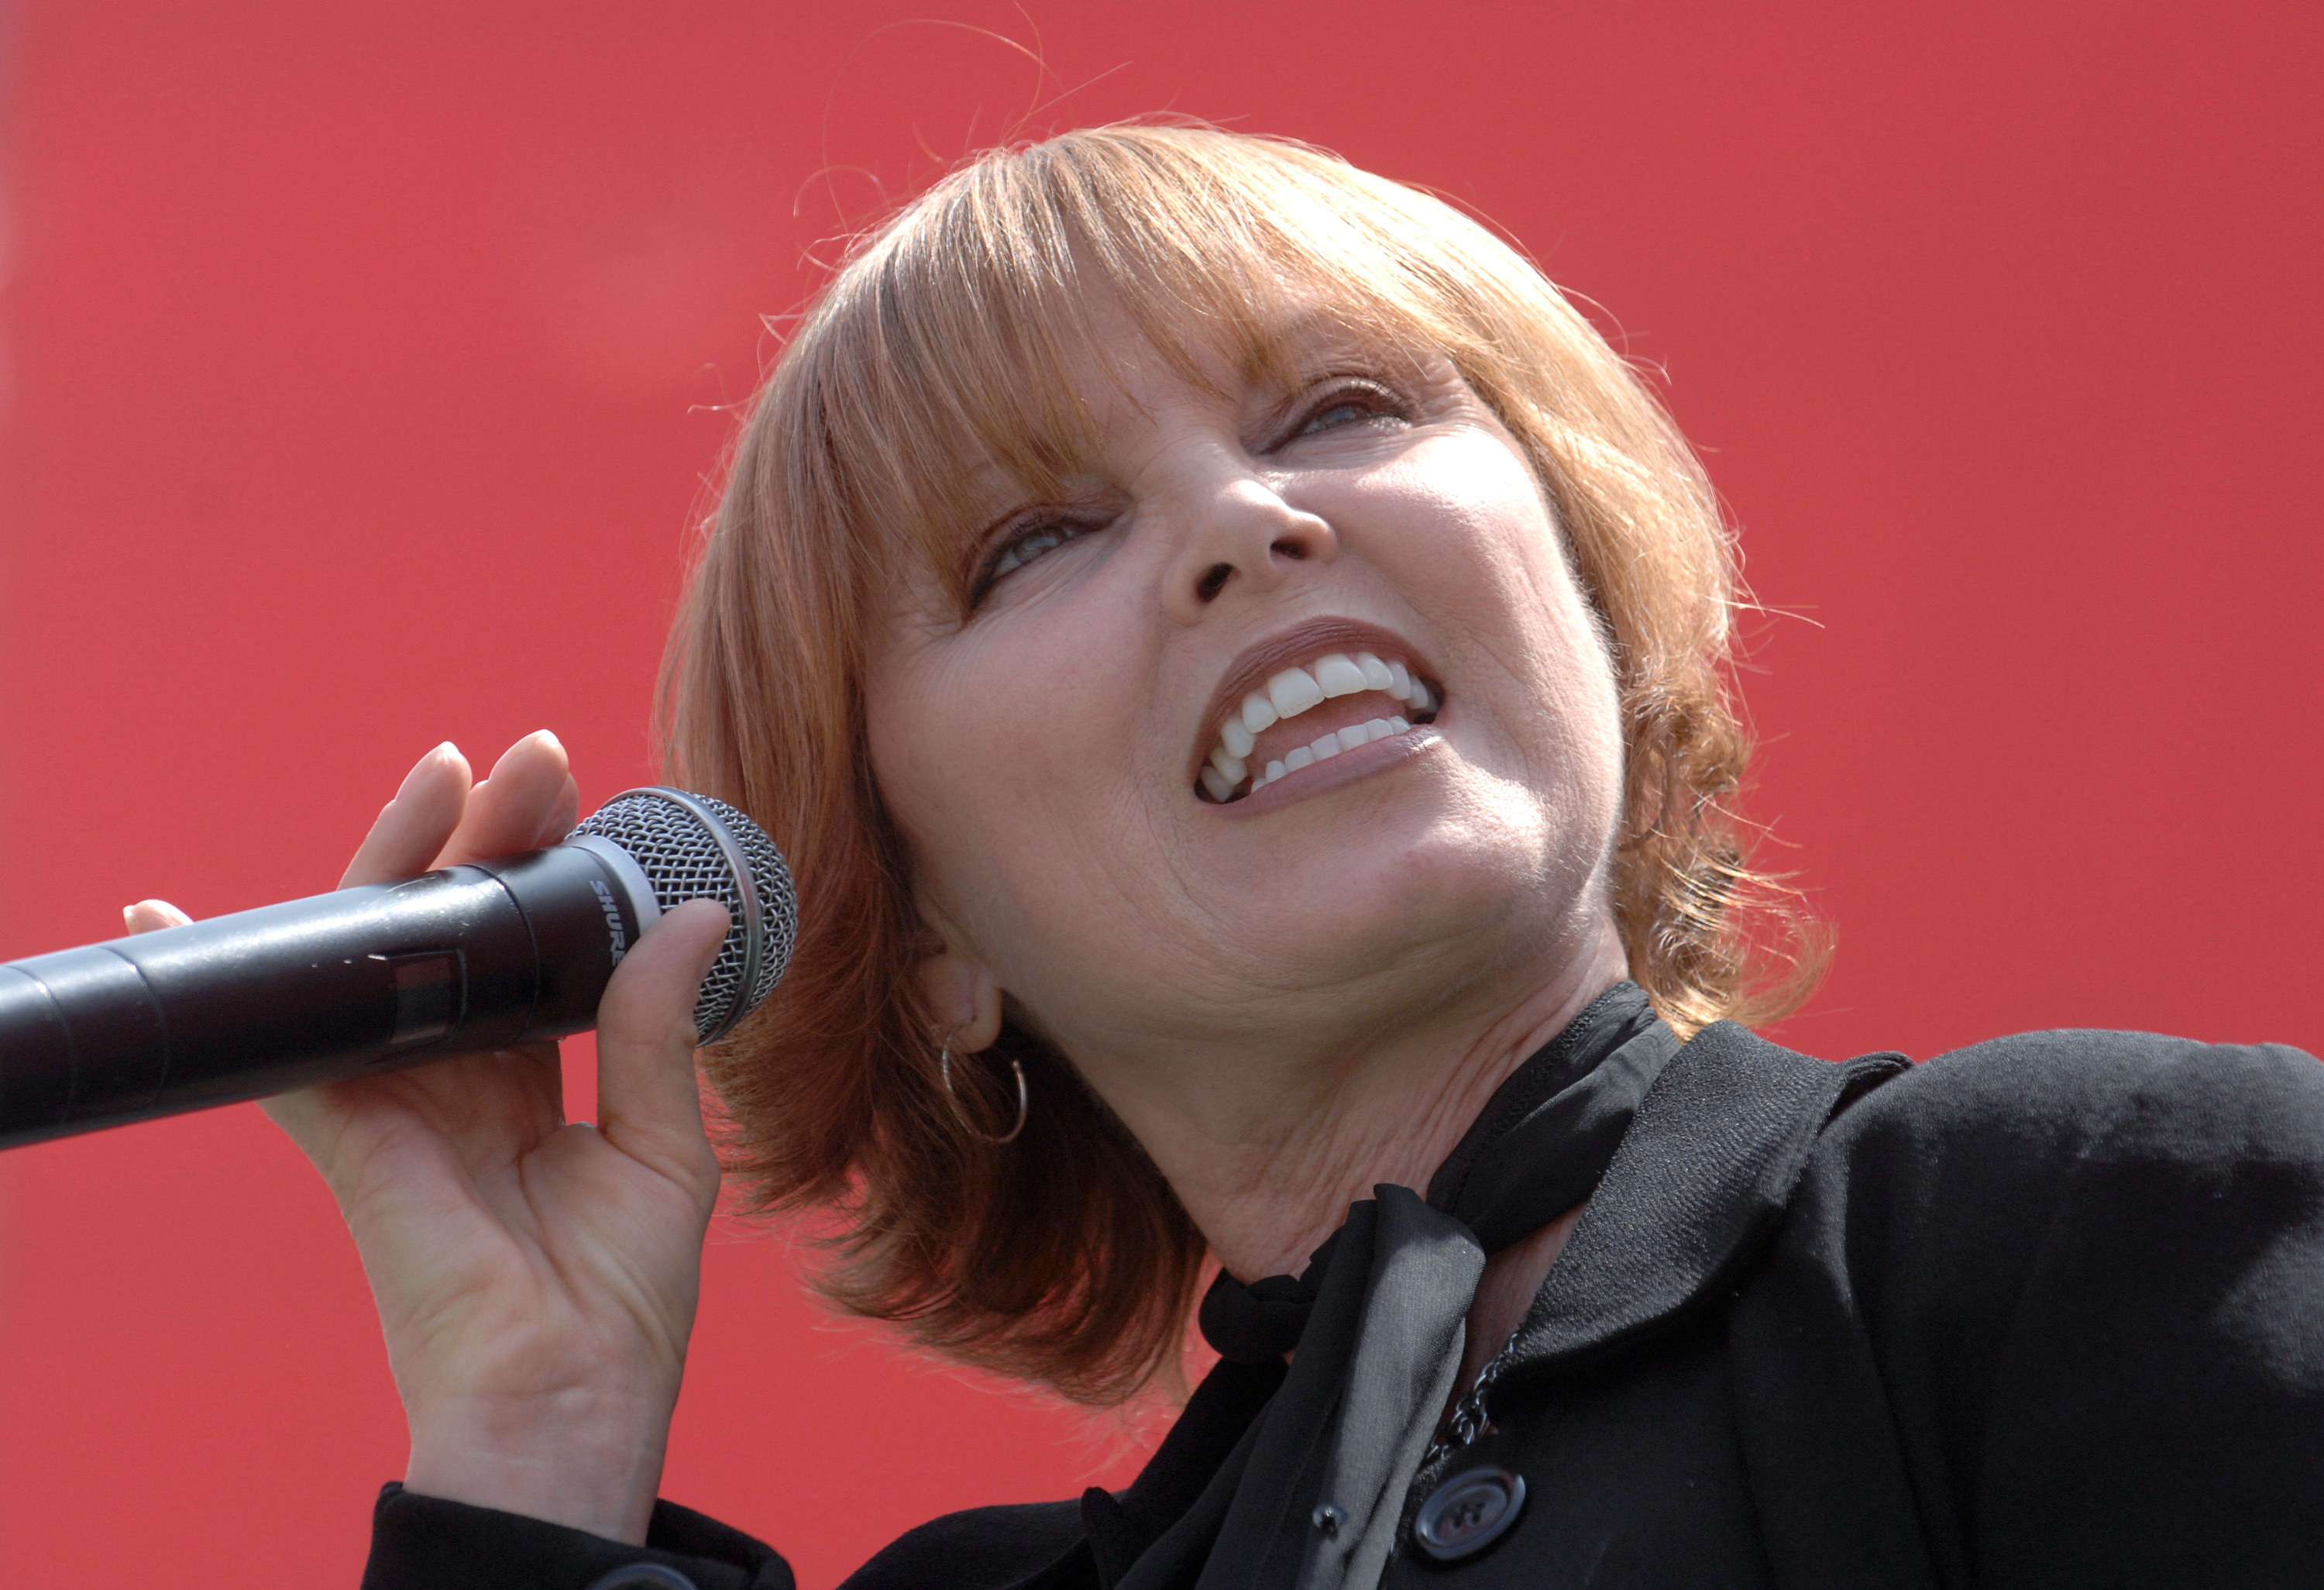 Pat Benatar won't perform 'Hit Me with Your Best Shot' anymore | Reuters